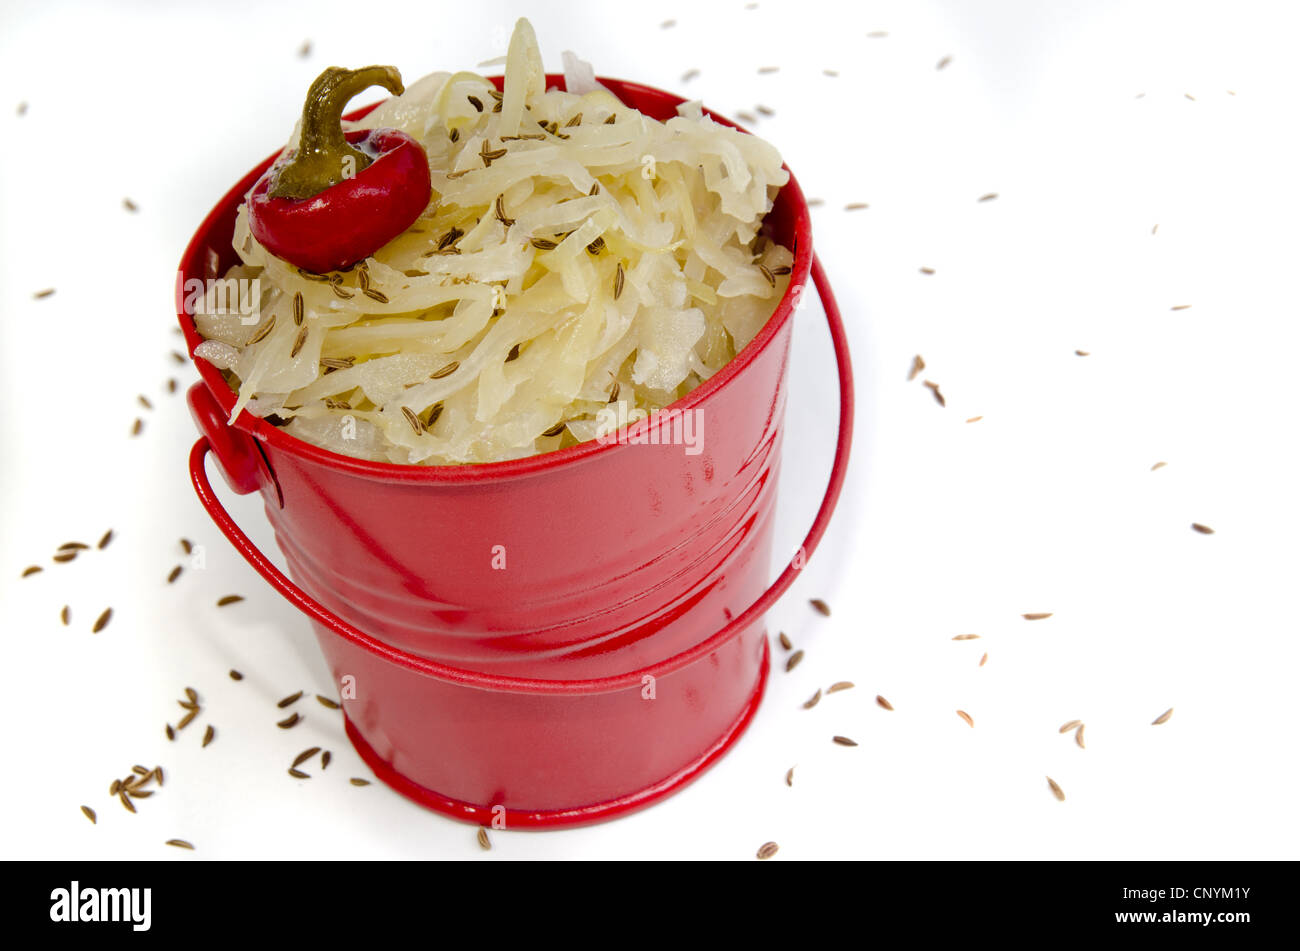 sauerkraut with caraway seeds in a red bucket Stock Photo